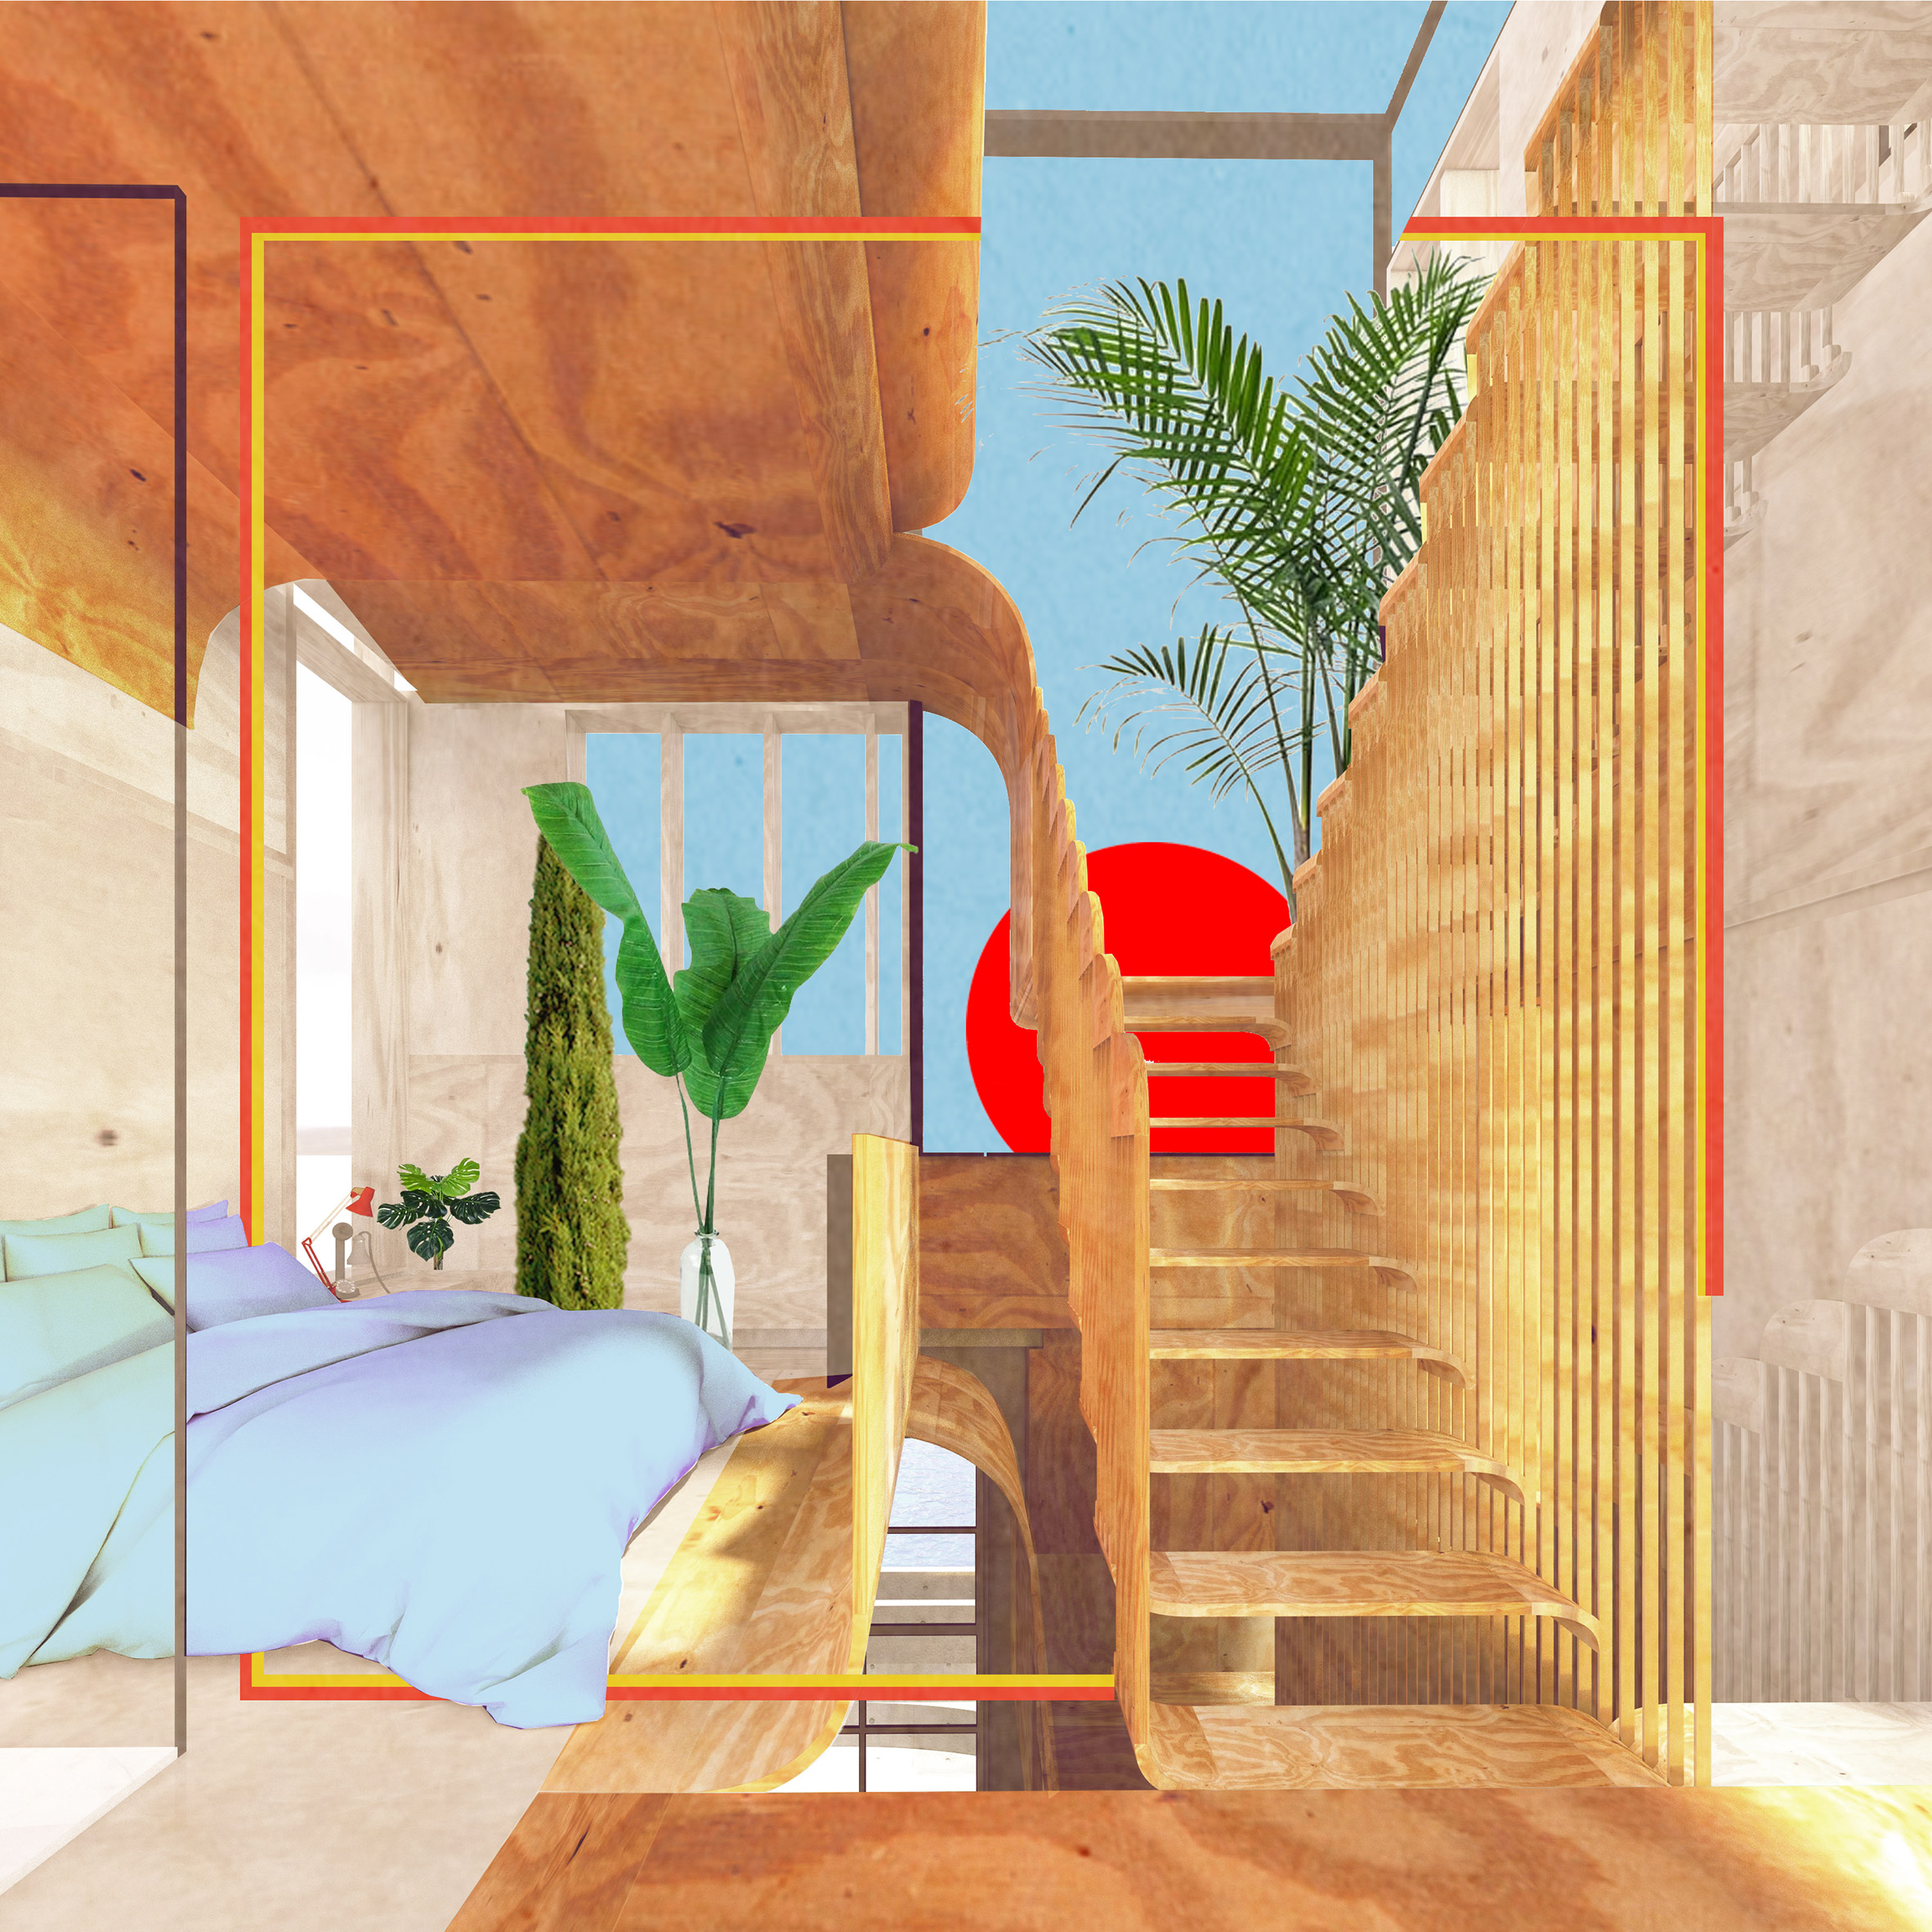 Dezeen x MINI Living Future Urban Home Competition: The Kentish Classic by The D*Haus Company